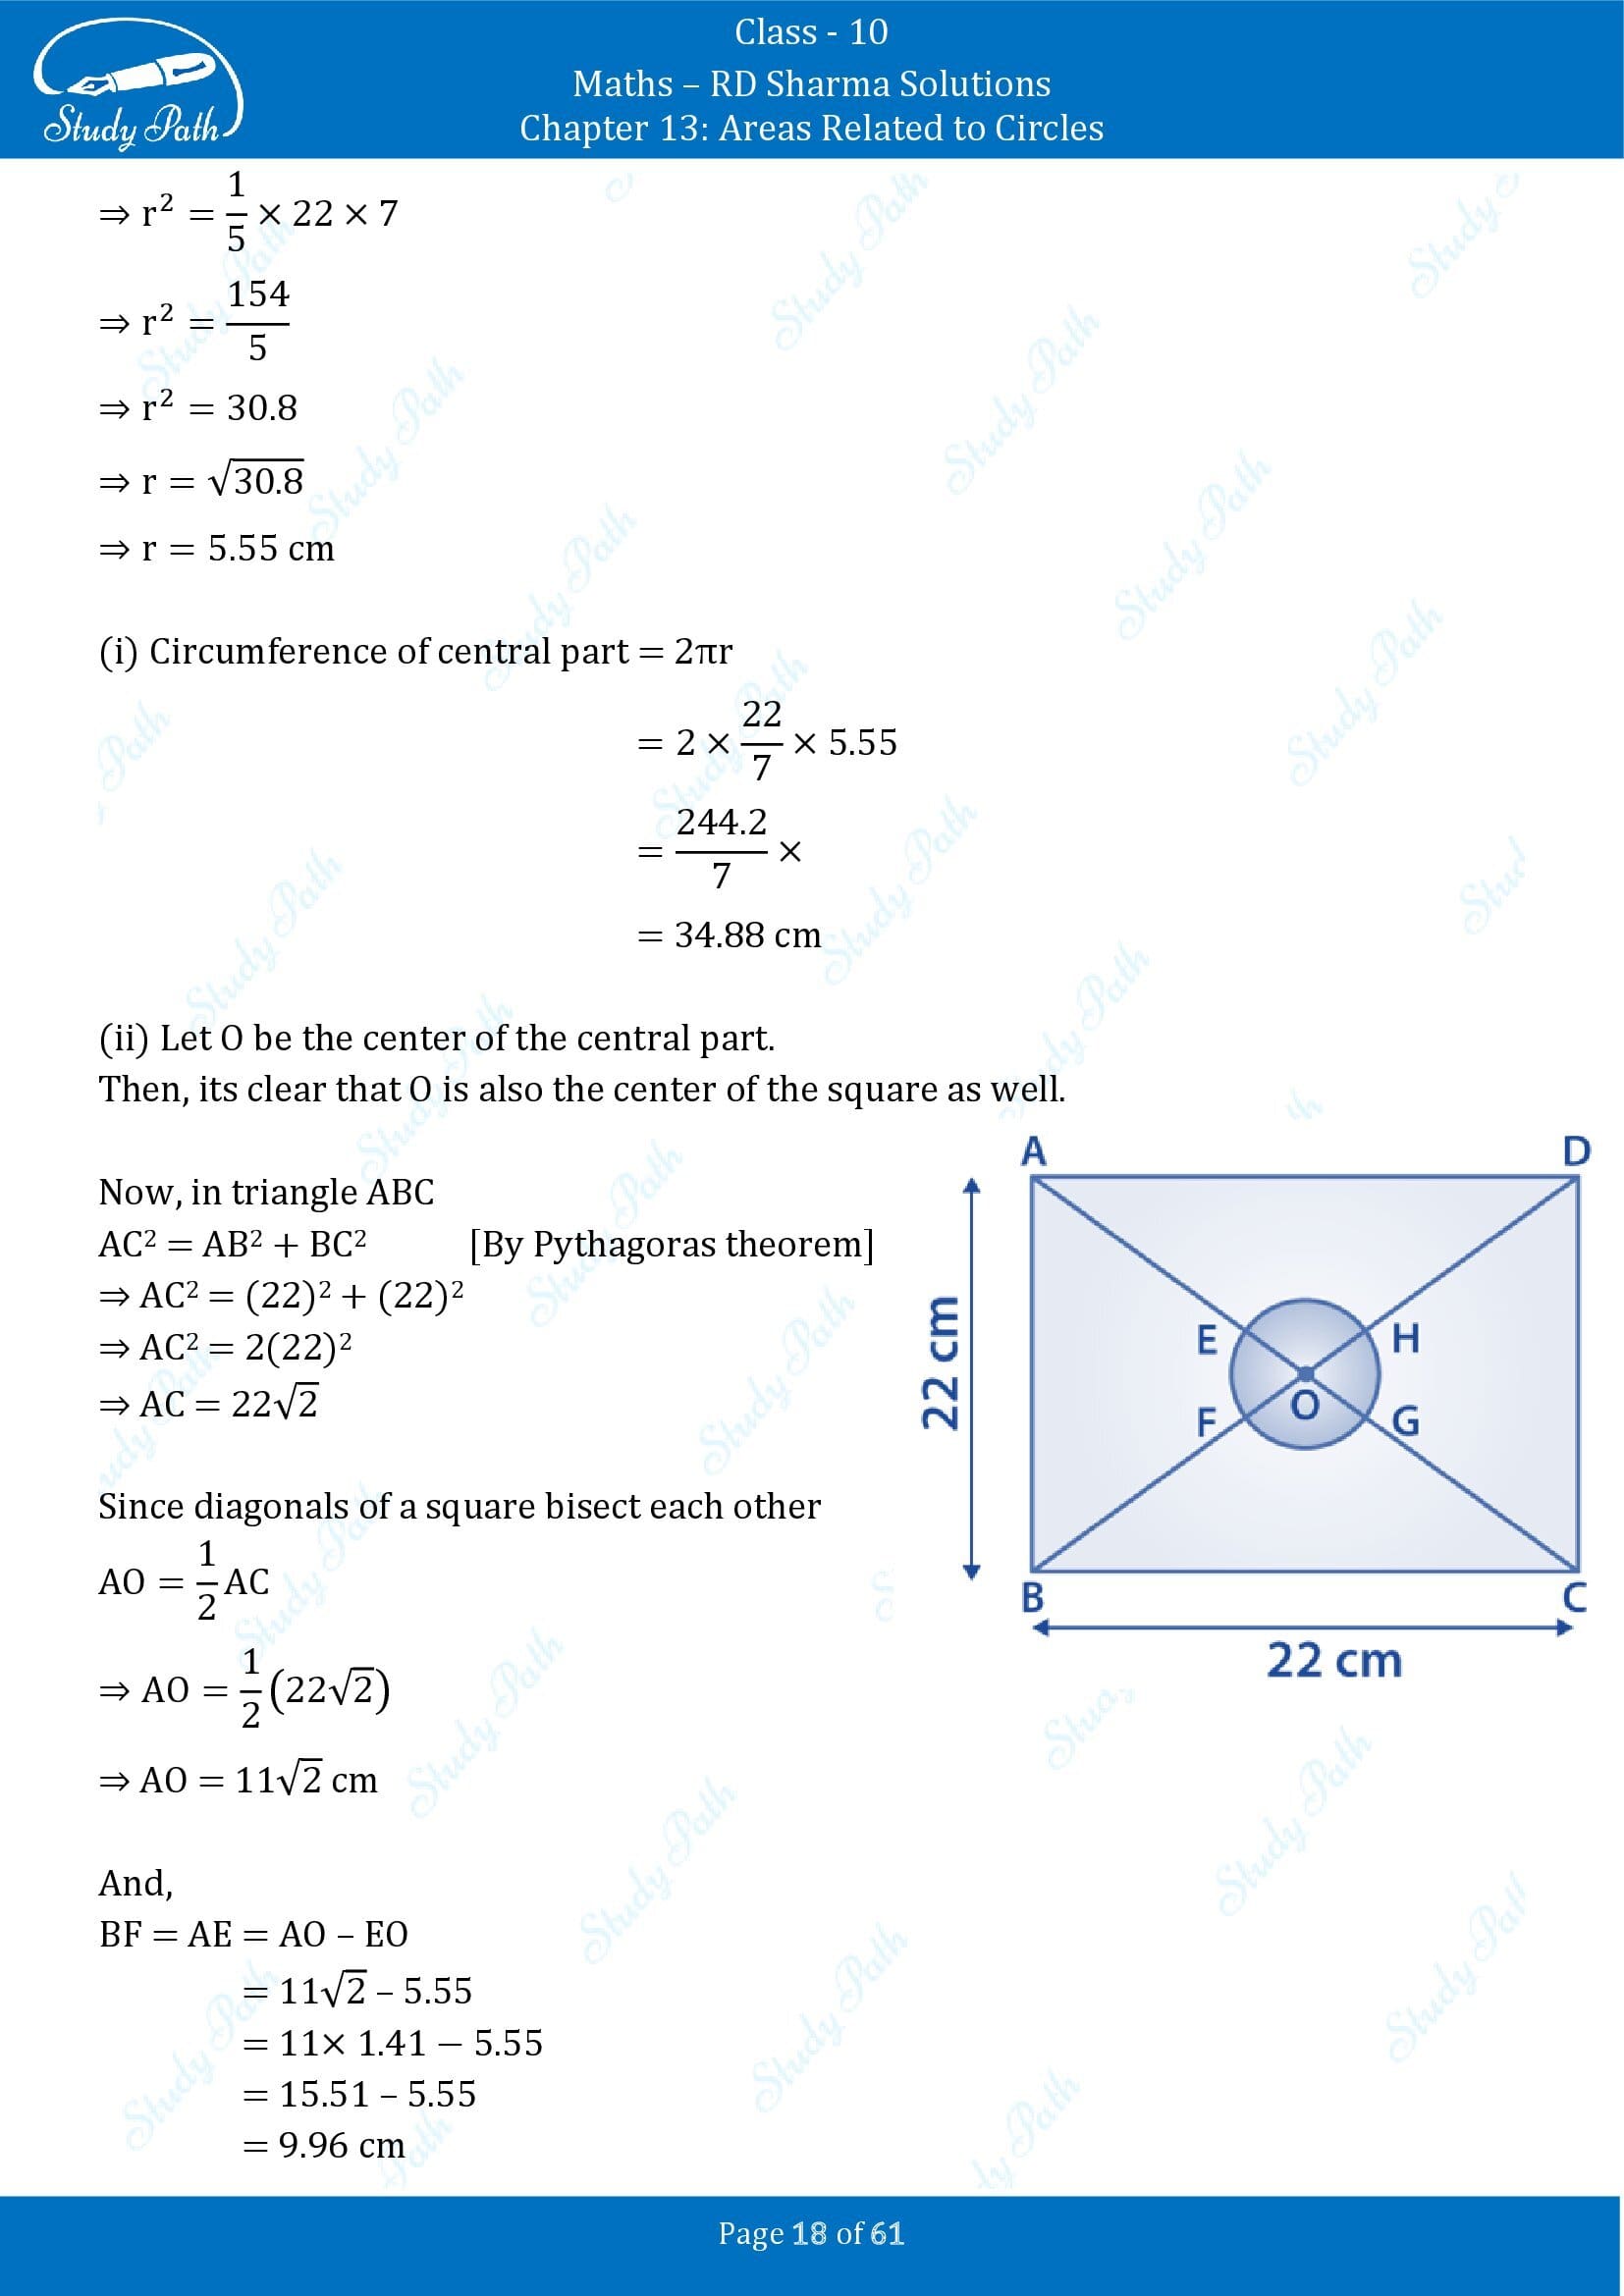 RD Sharma Solutions Class 10 Chapter 13 Areas Related to Circles Exercise 13.4 00018